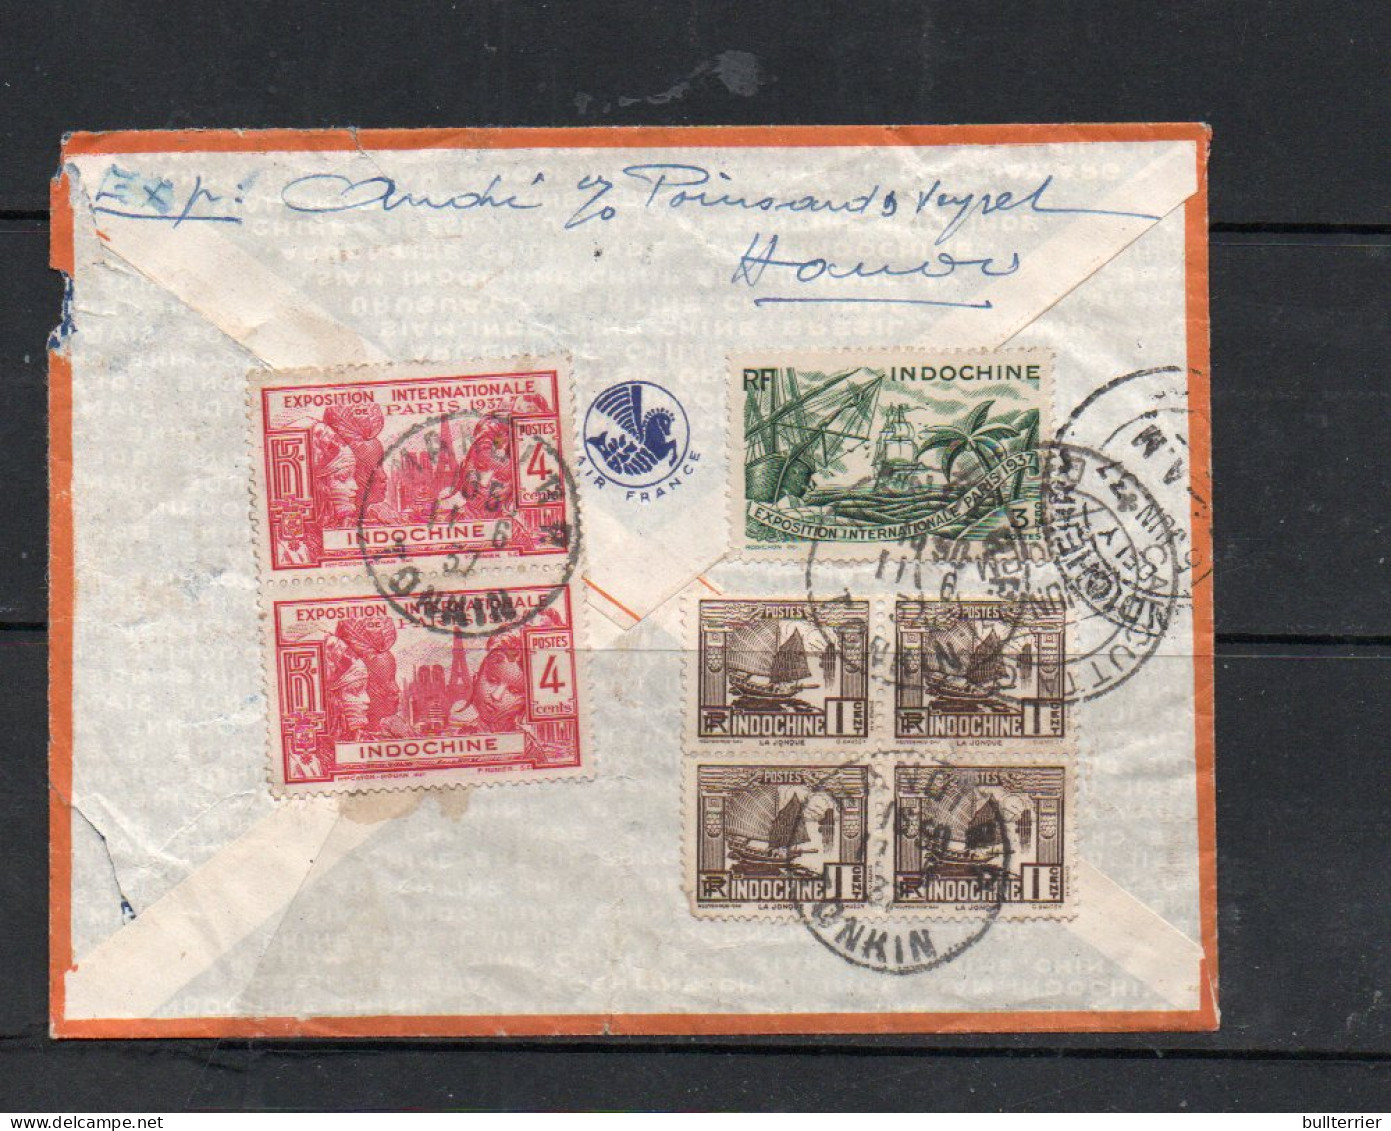 INDOCHINA - 1937 - AIRMAIL COVER HANOI TO PONDICHERRY FRENCH INDIA WITH BACKSTAMPS - Posta Aerea